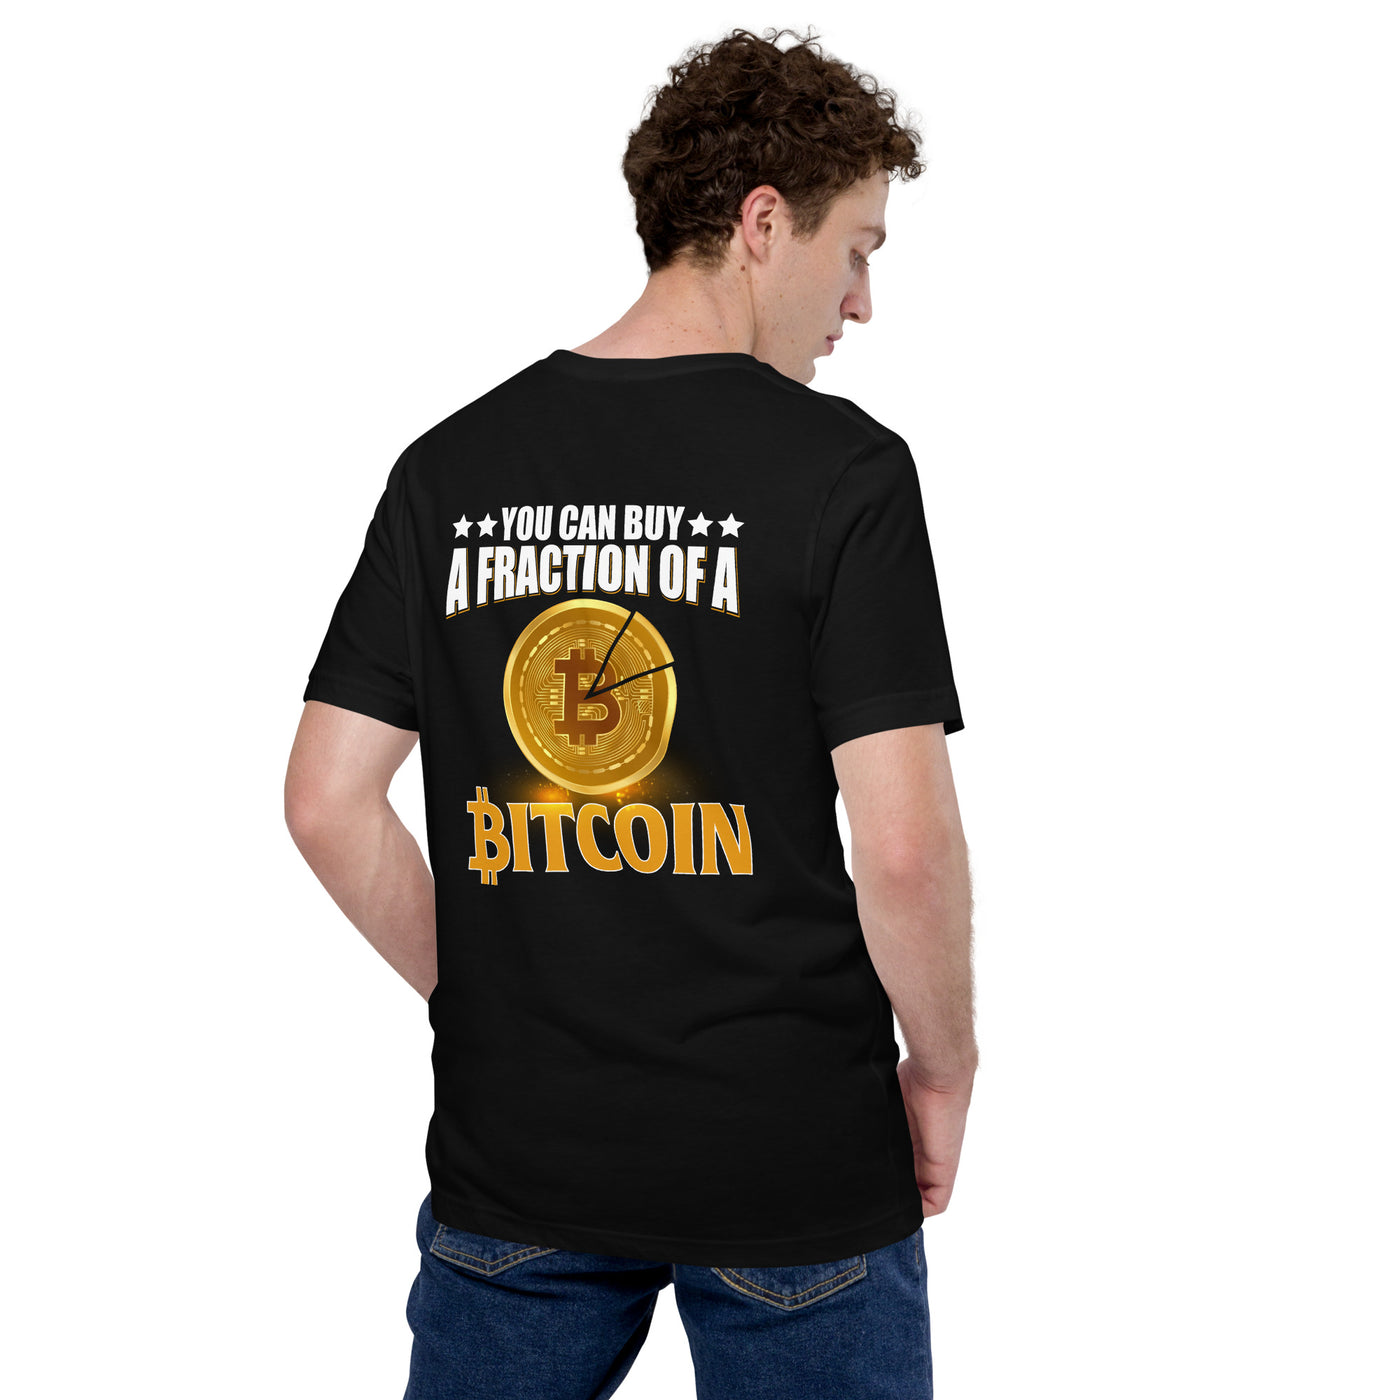 You can Buy a Fraction of a Bitcoin - Unisex t-shirt ( Back Print )